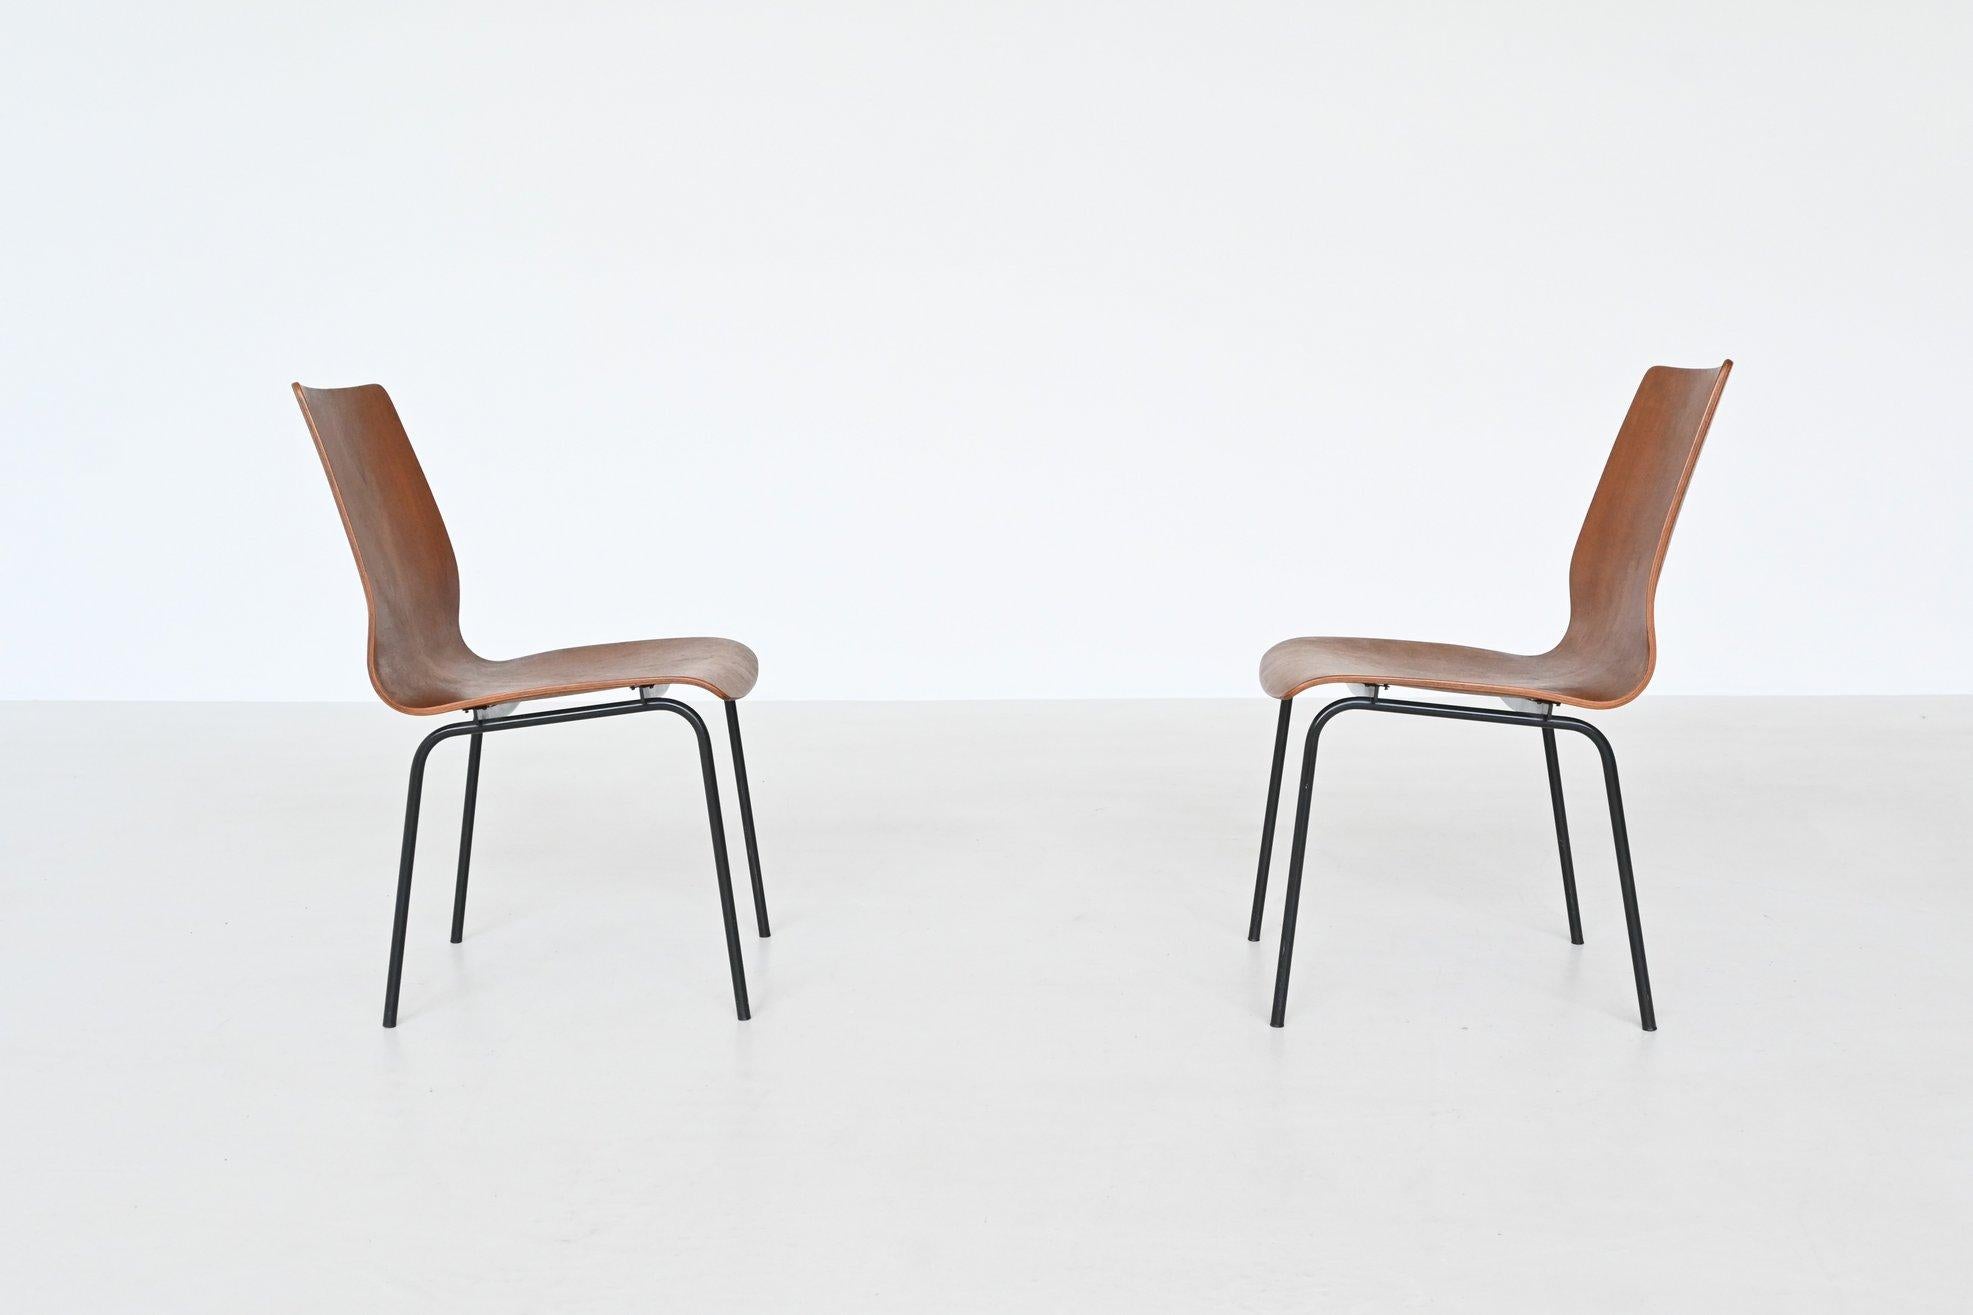 Metal Friso Kramer Euroika Series Chairs Auping the Netherlands, 1963